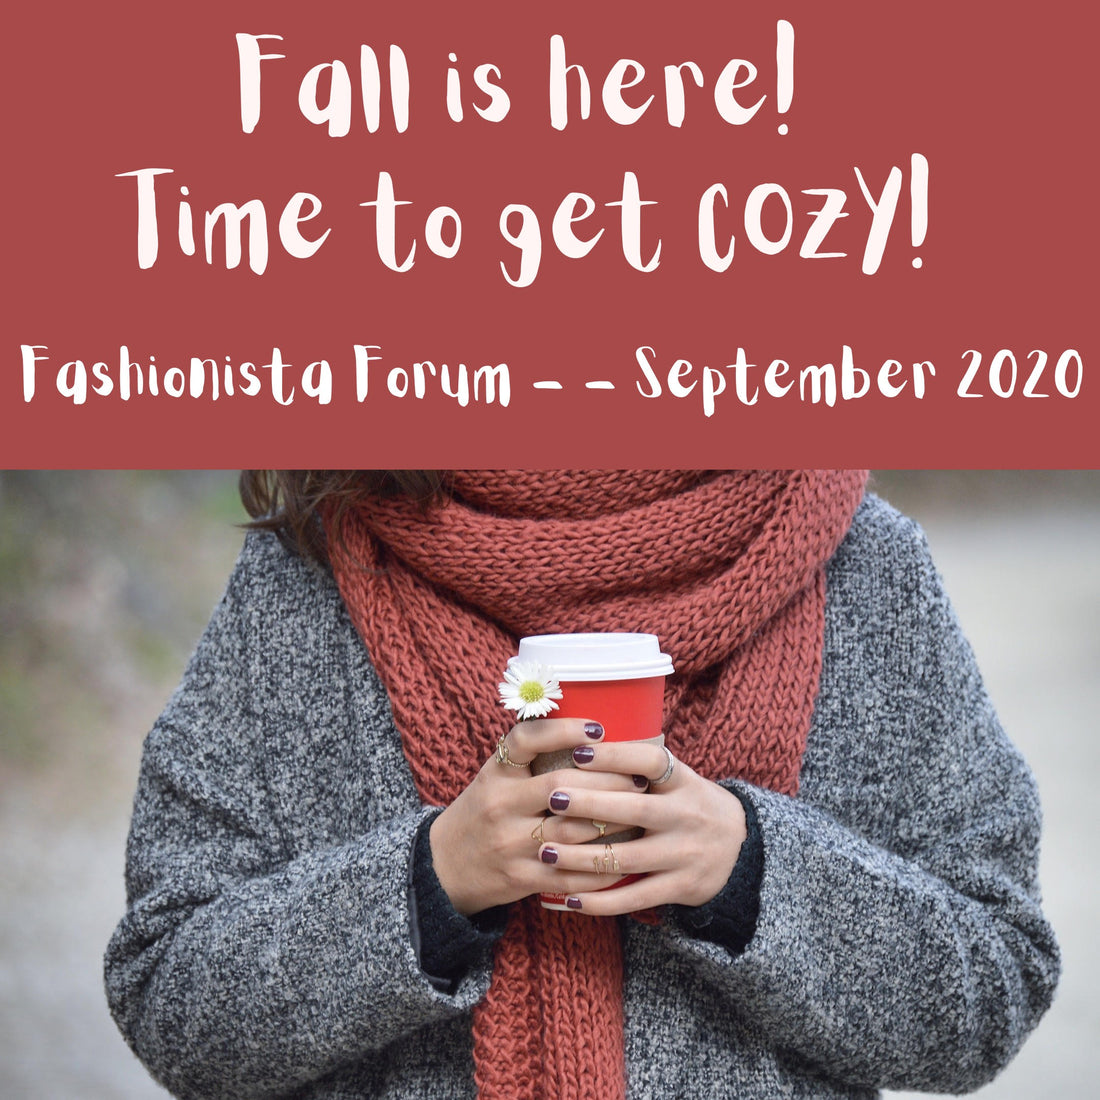 FALL IS HERE! TIME TO GET COZY!